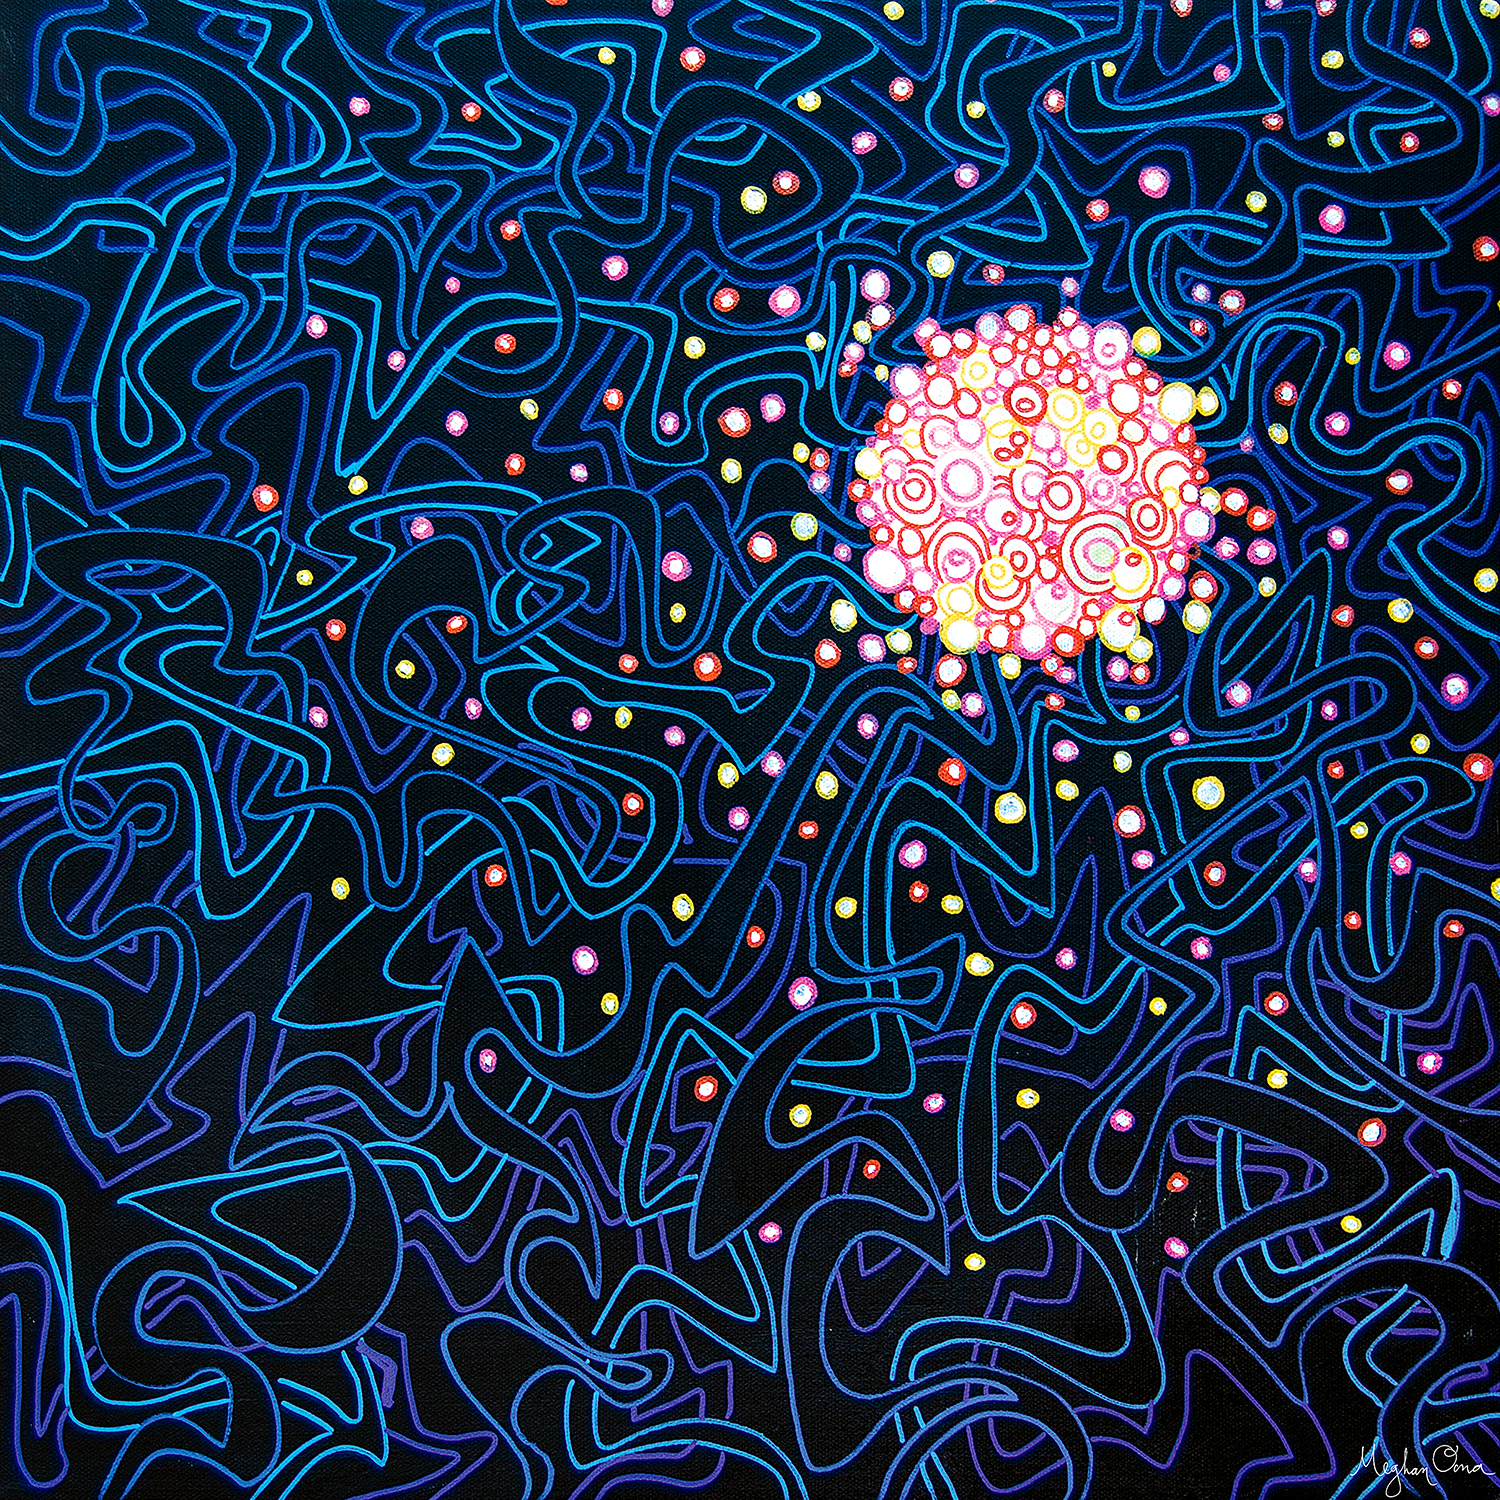 tangled blue lines and colorful dots surrounding a bright cluster